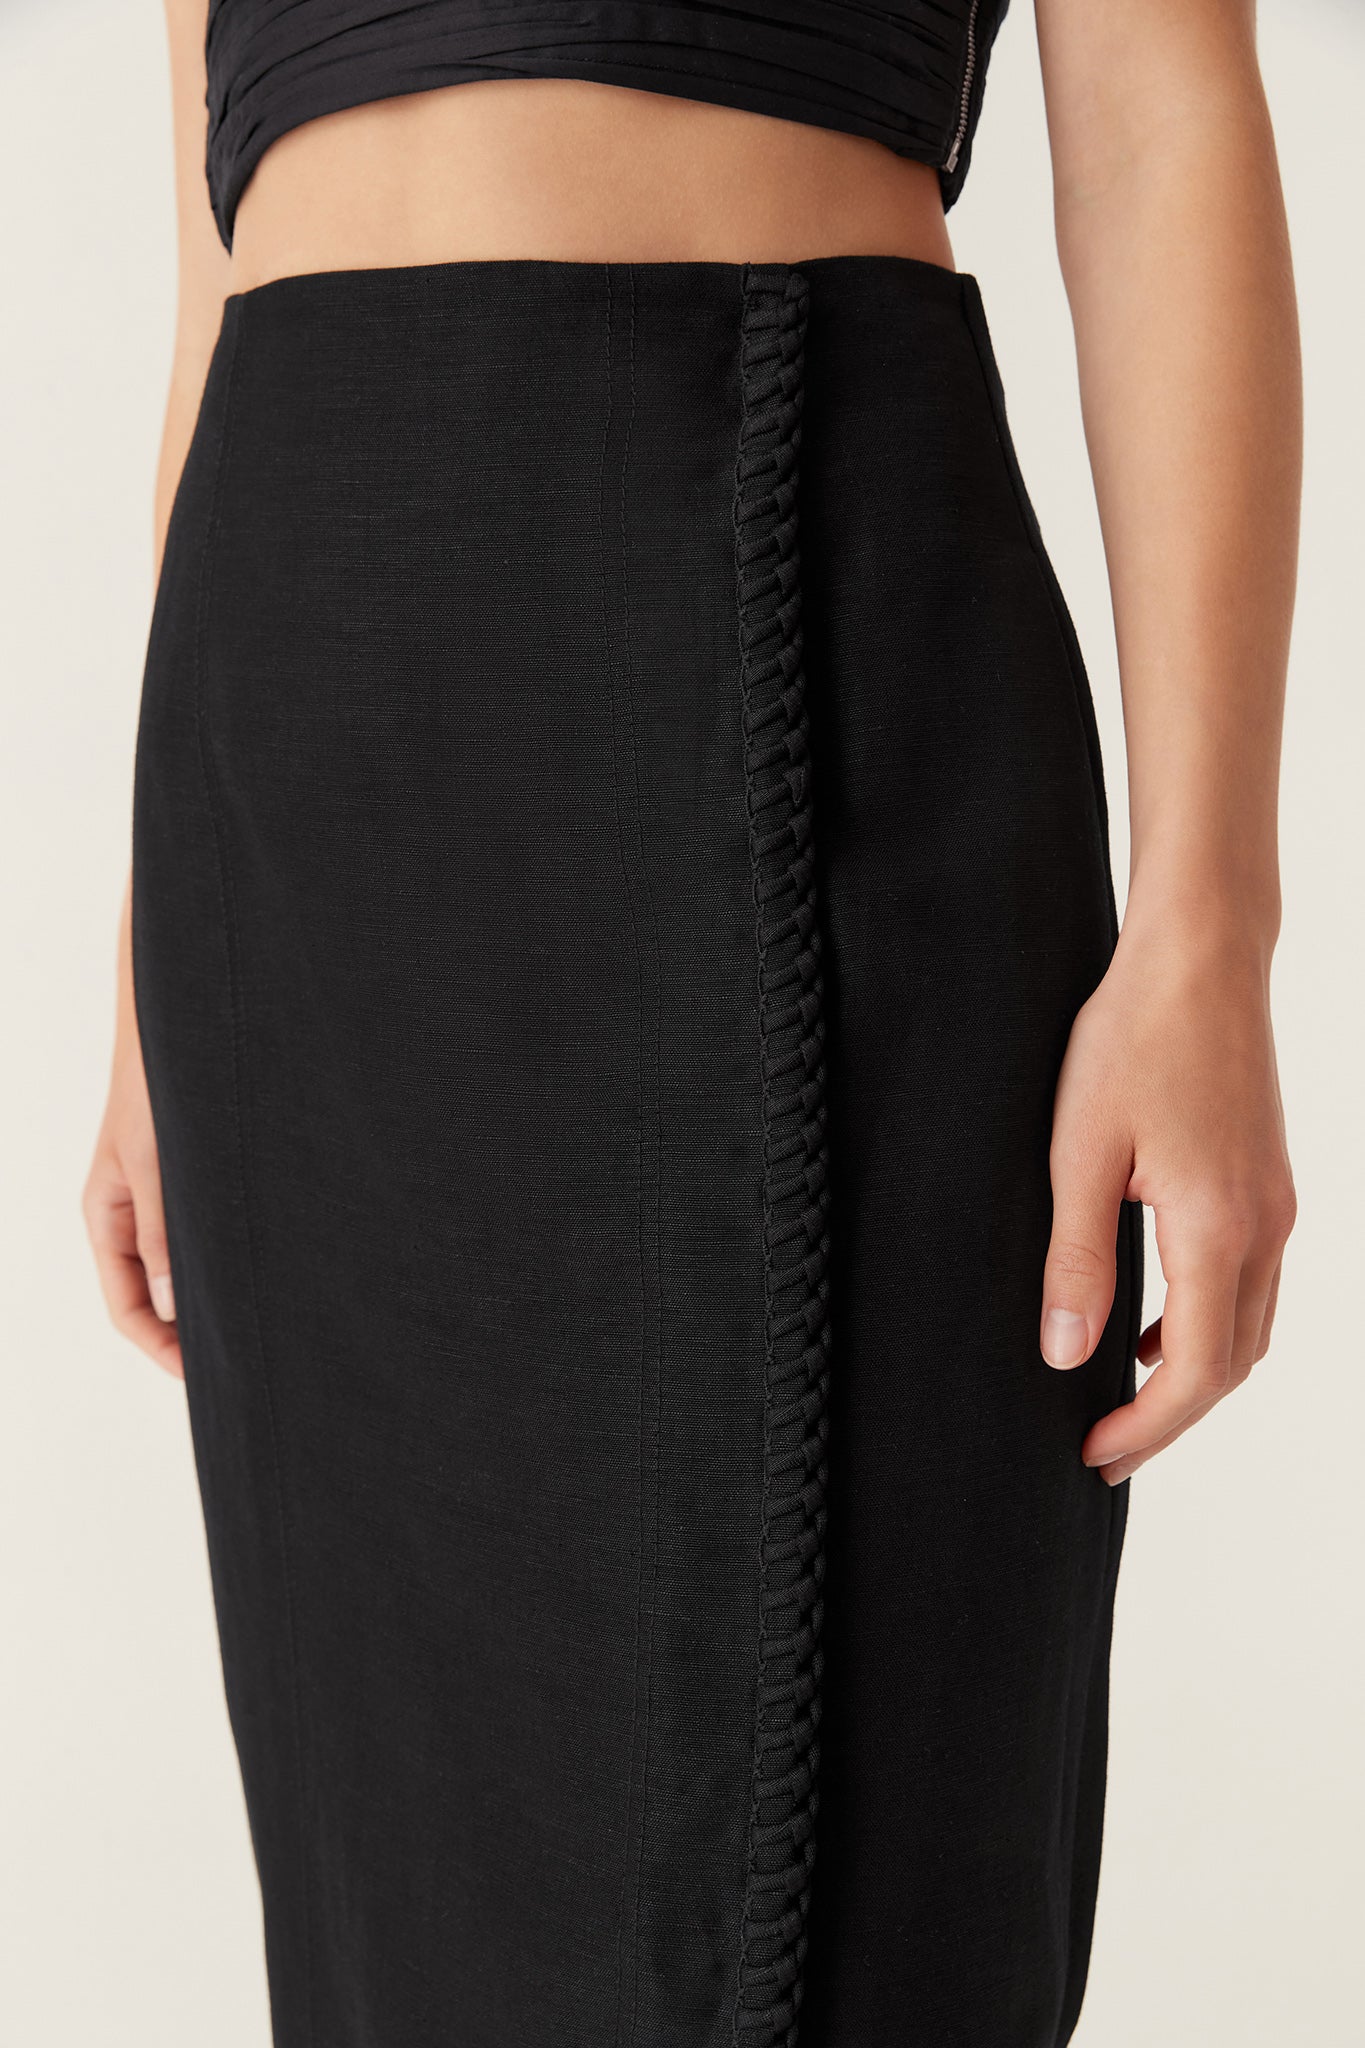 Perspective Belted Midi Skirt, Black